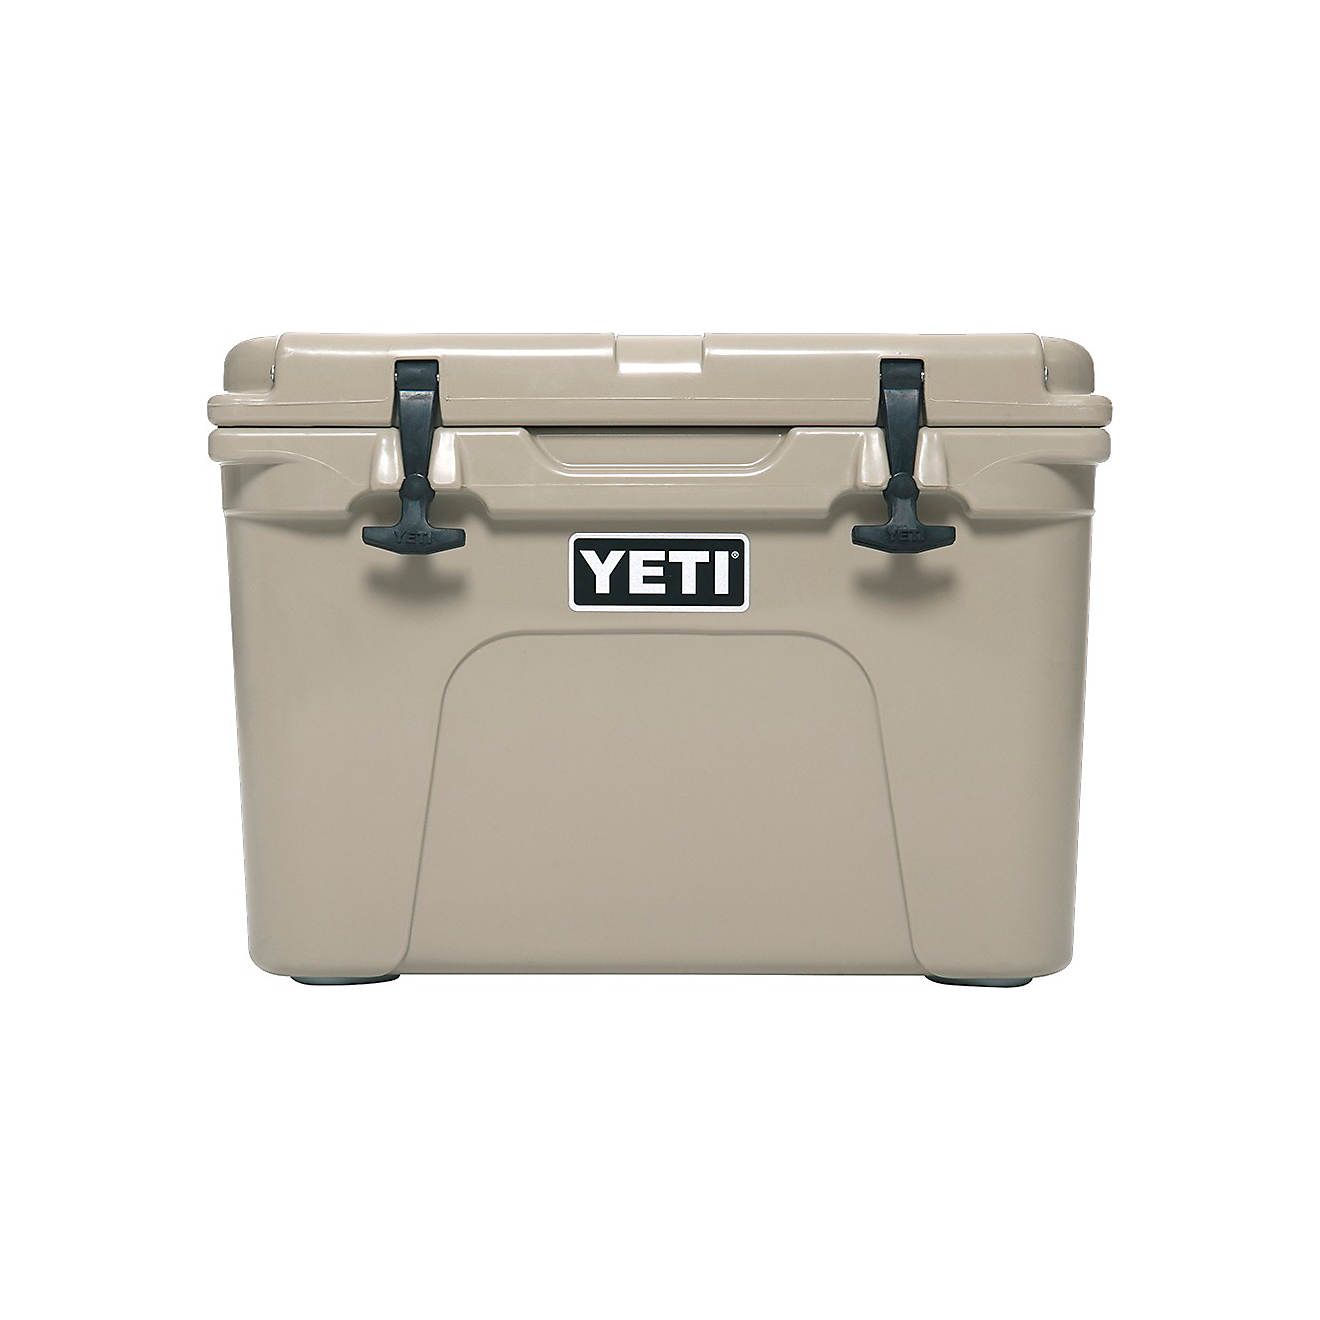 YETI Tundra 35 Cooler | Academy Sports + Outdoor Affiliate